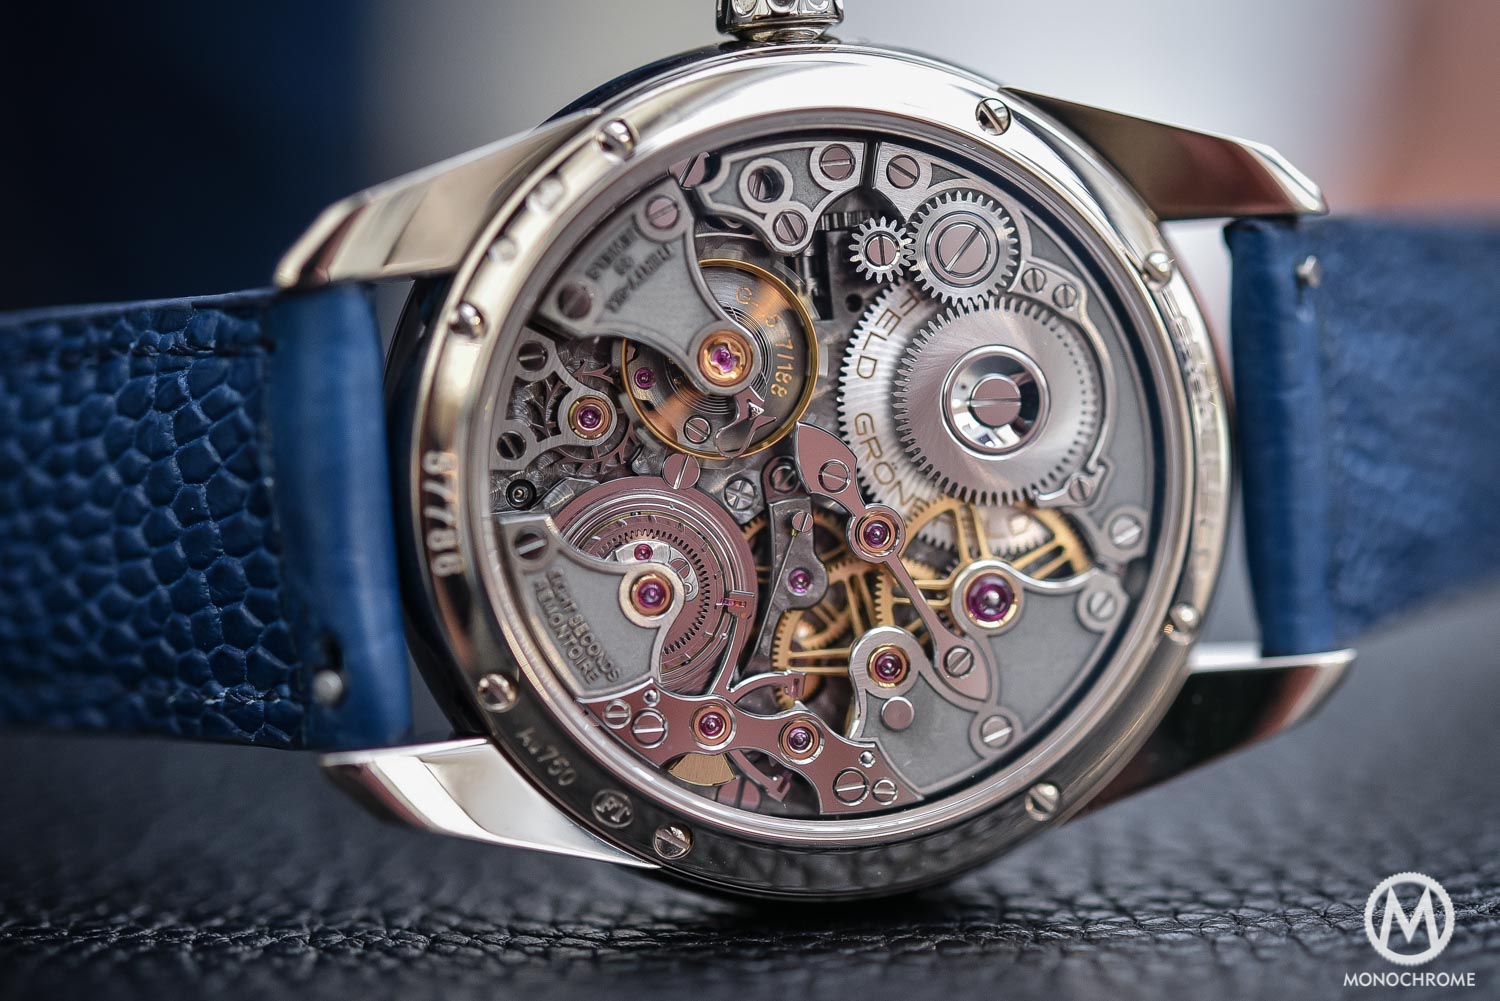 Top 5 Watches from Baselworld 2016 - Gronefeld 1941 Remontoire - Top 5 From Baselworld 2016 Frank - 2